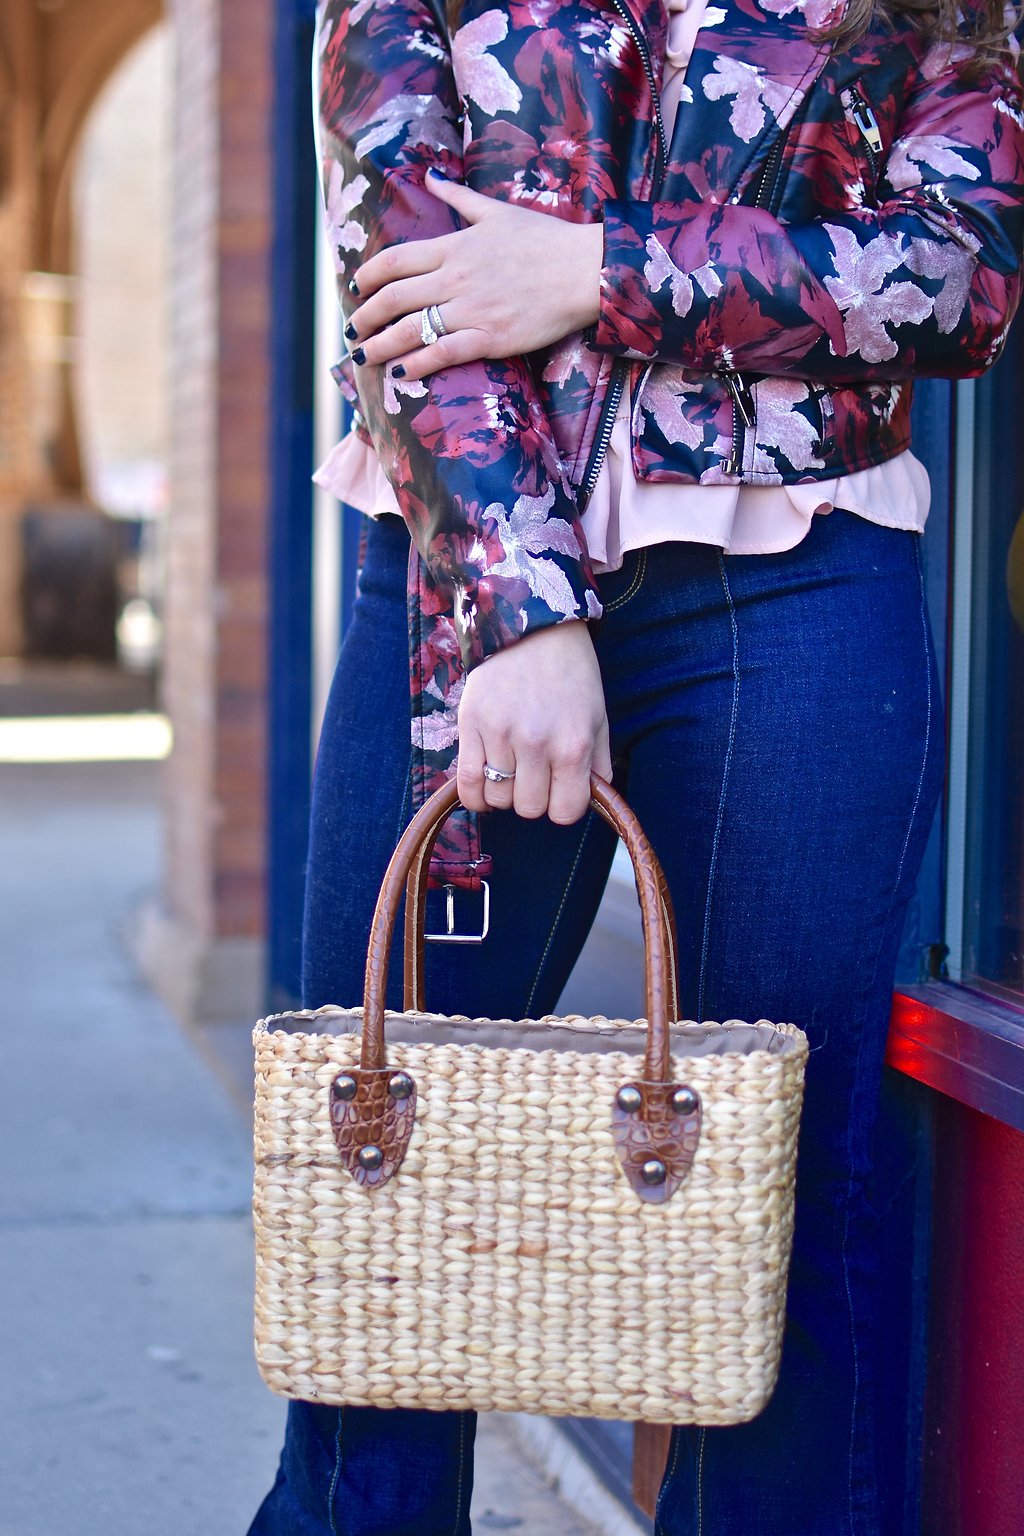 Lifestyle blogger Roxanne of Glass of glam wearing Modcloth flares, a Le Tote Jacket, Lulus blouse, and a straw bag - Affordable Shopbop Sale Picks by popular Chicago style blogger Glass of Glam